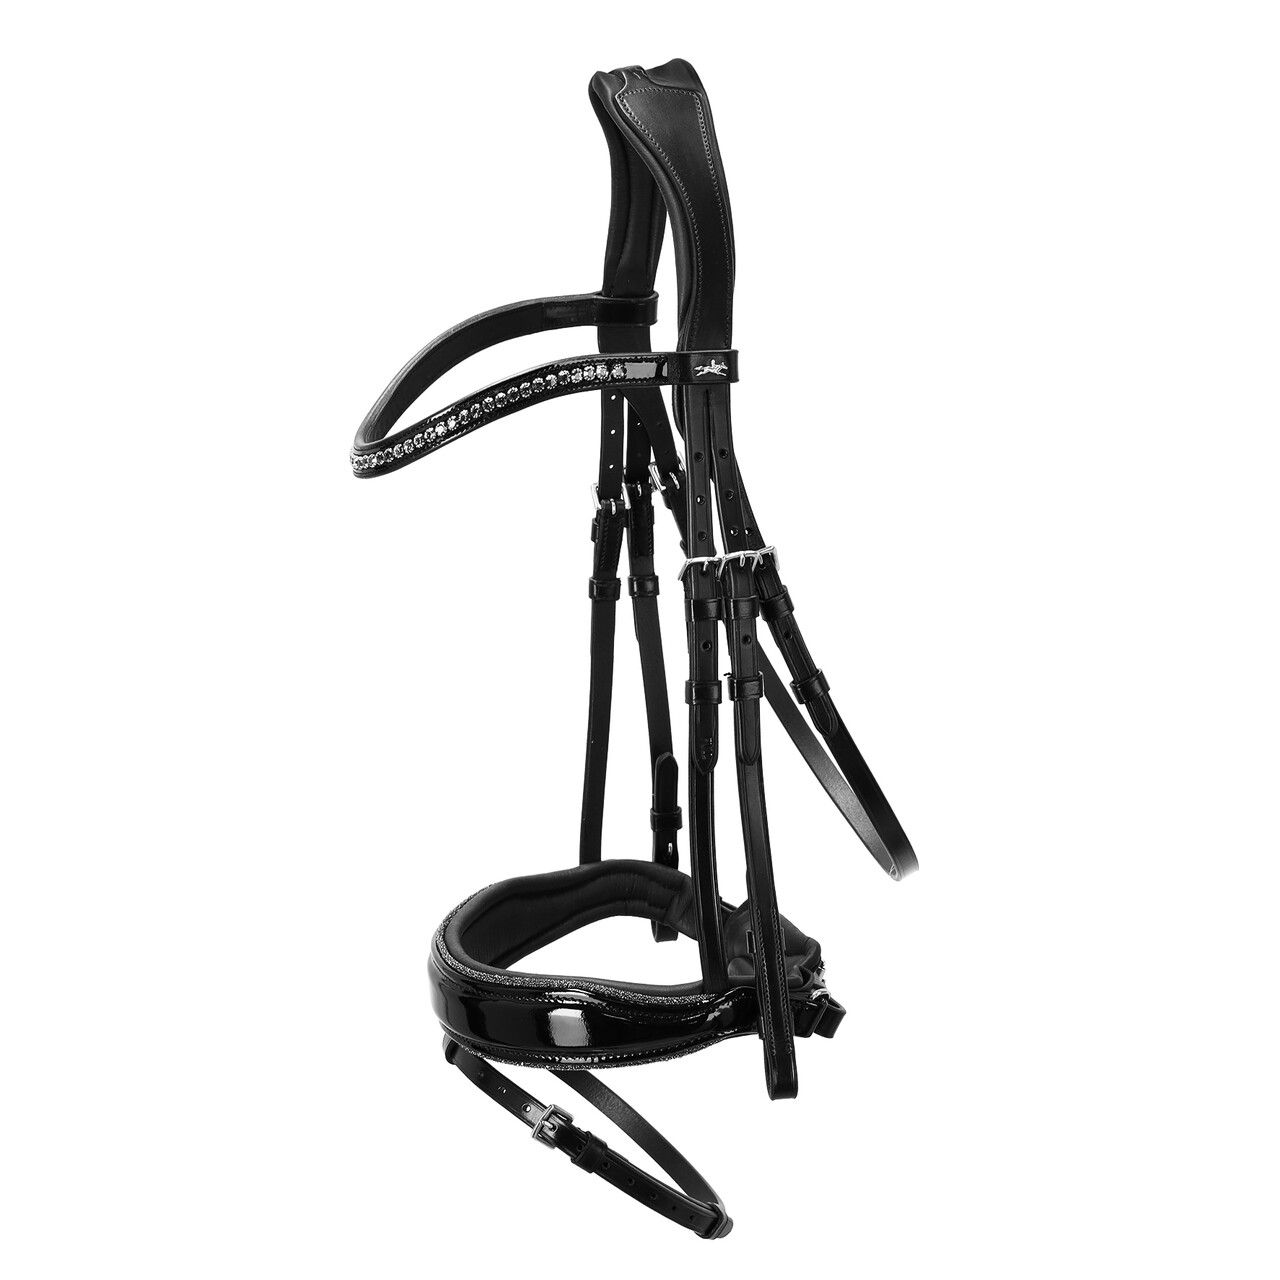 Schockemohle Stanford Anatomic Bridle Bridle Schockemohle - Equestrian Fashion Outfitters